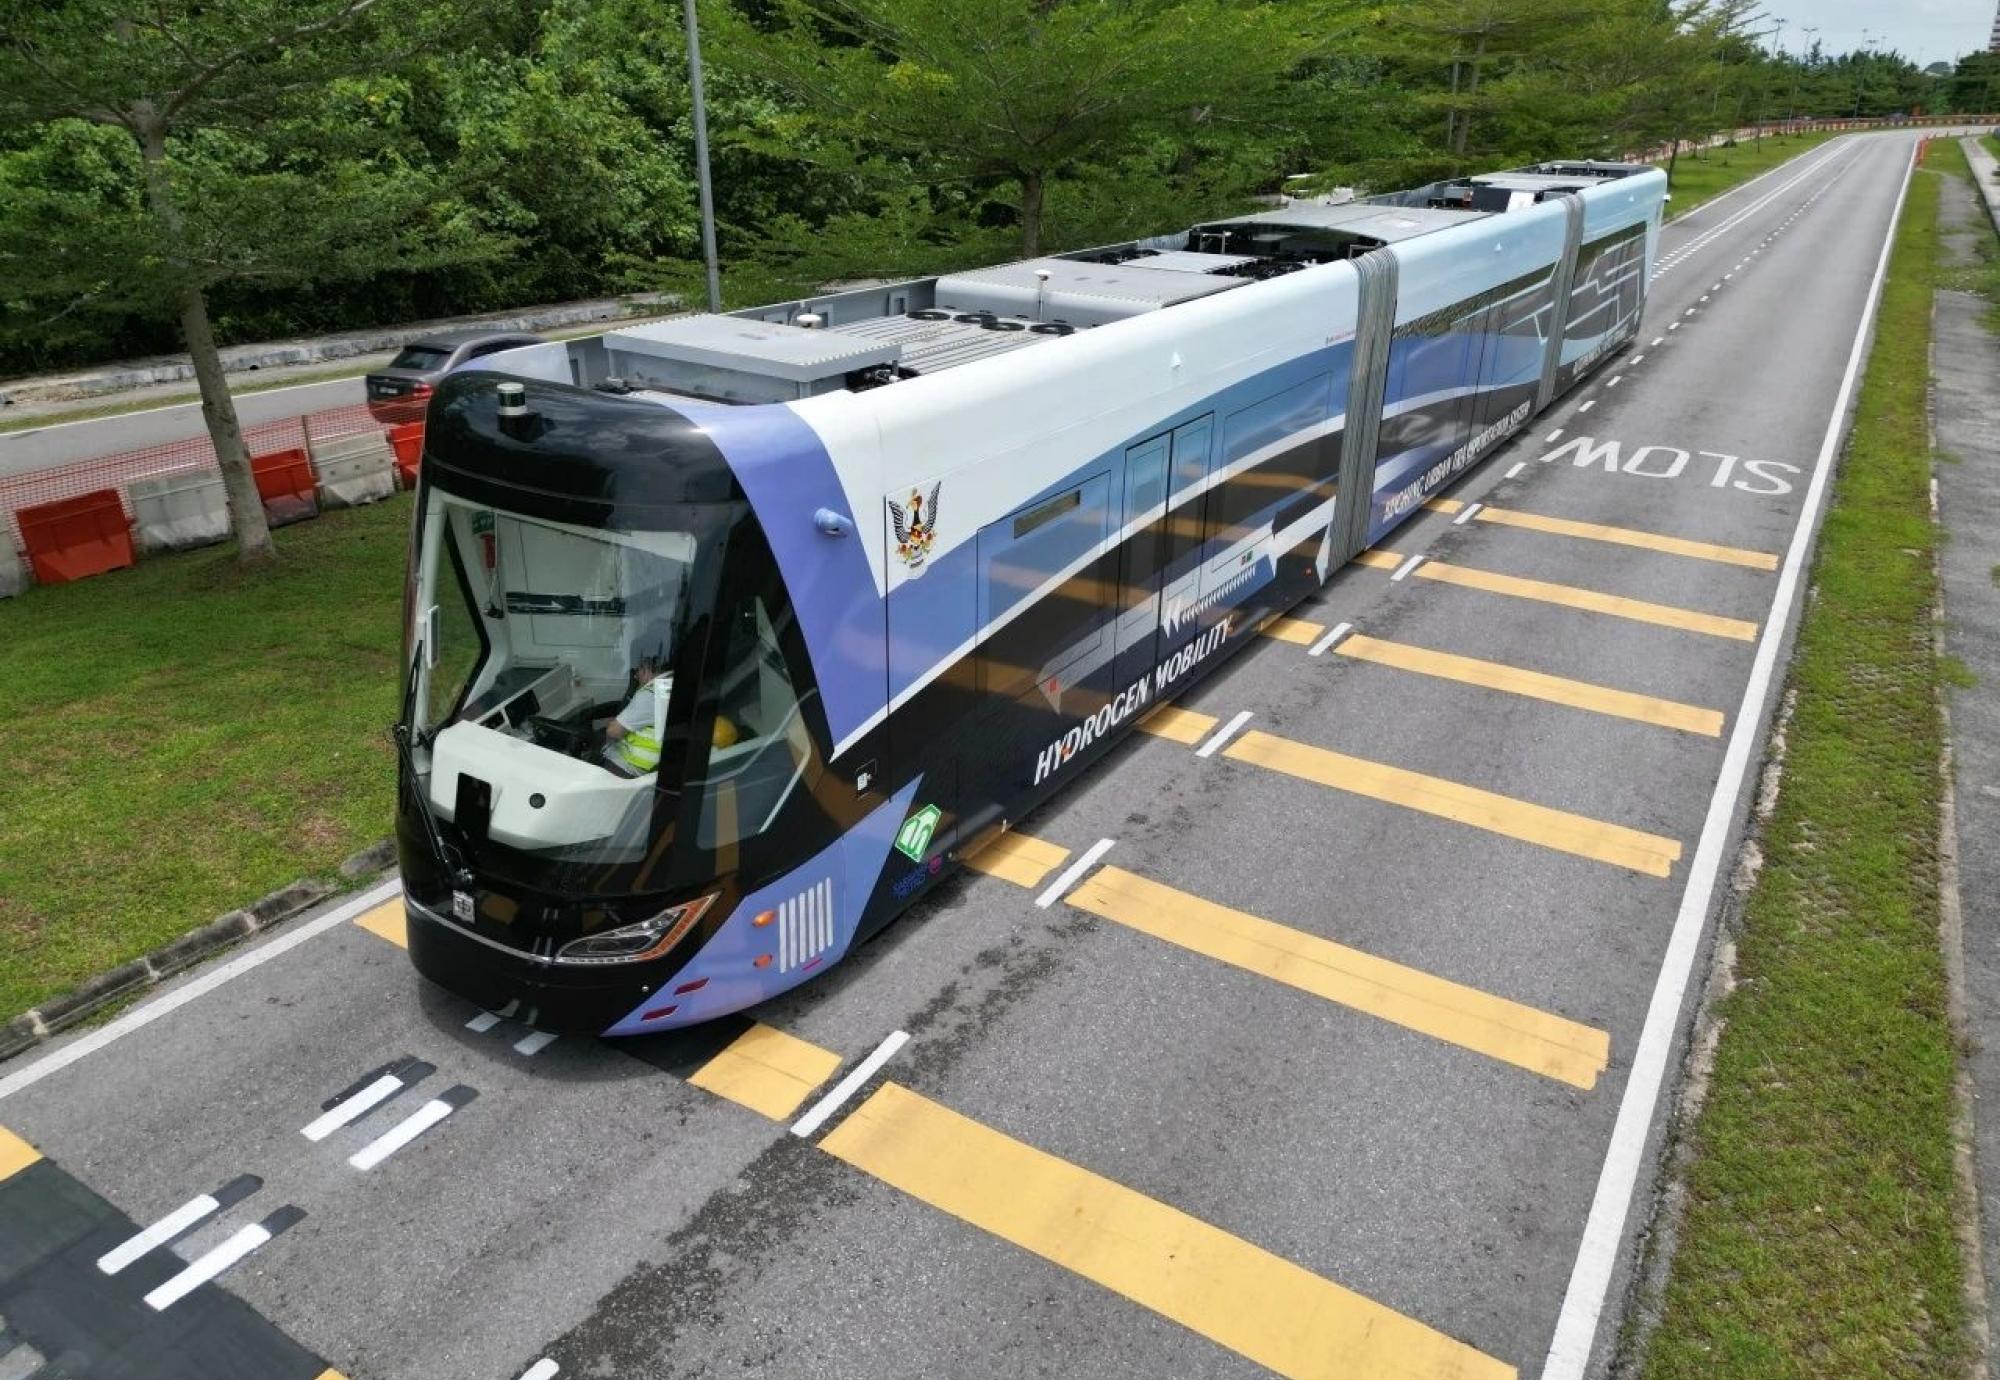 ‘Smart-Tram’ launched in Malaysia powered by hydrogen